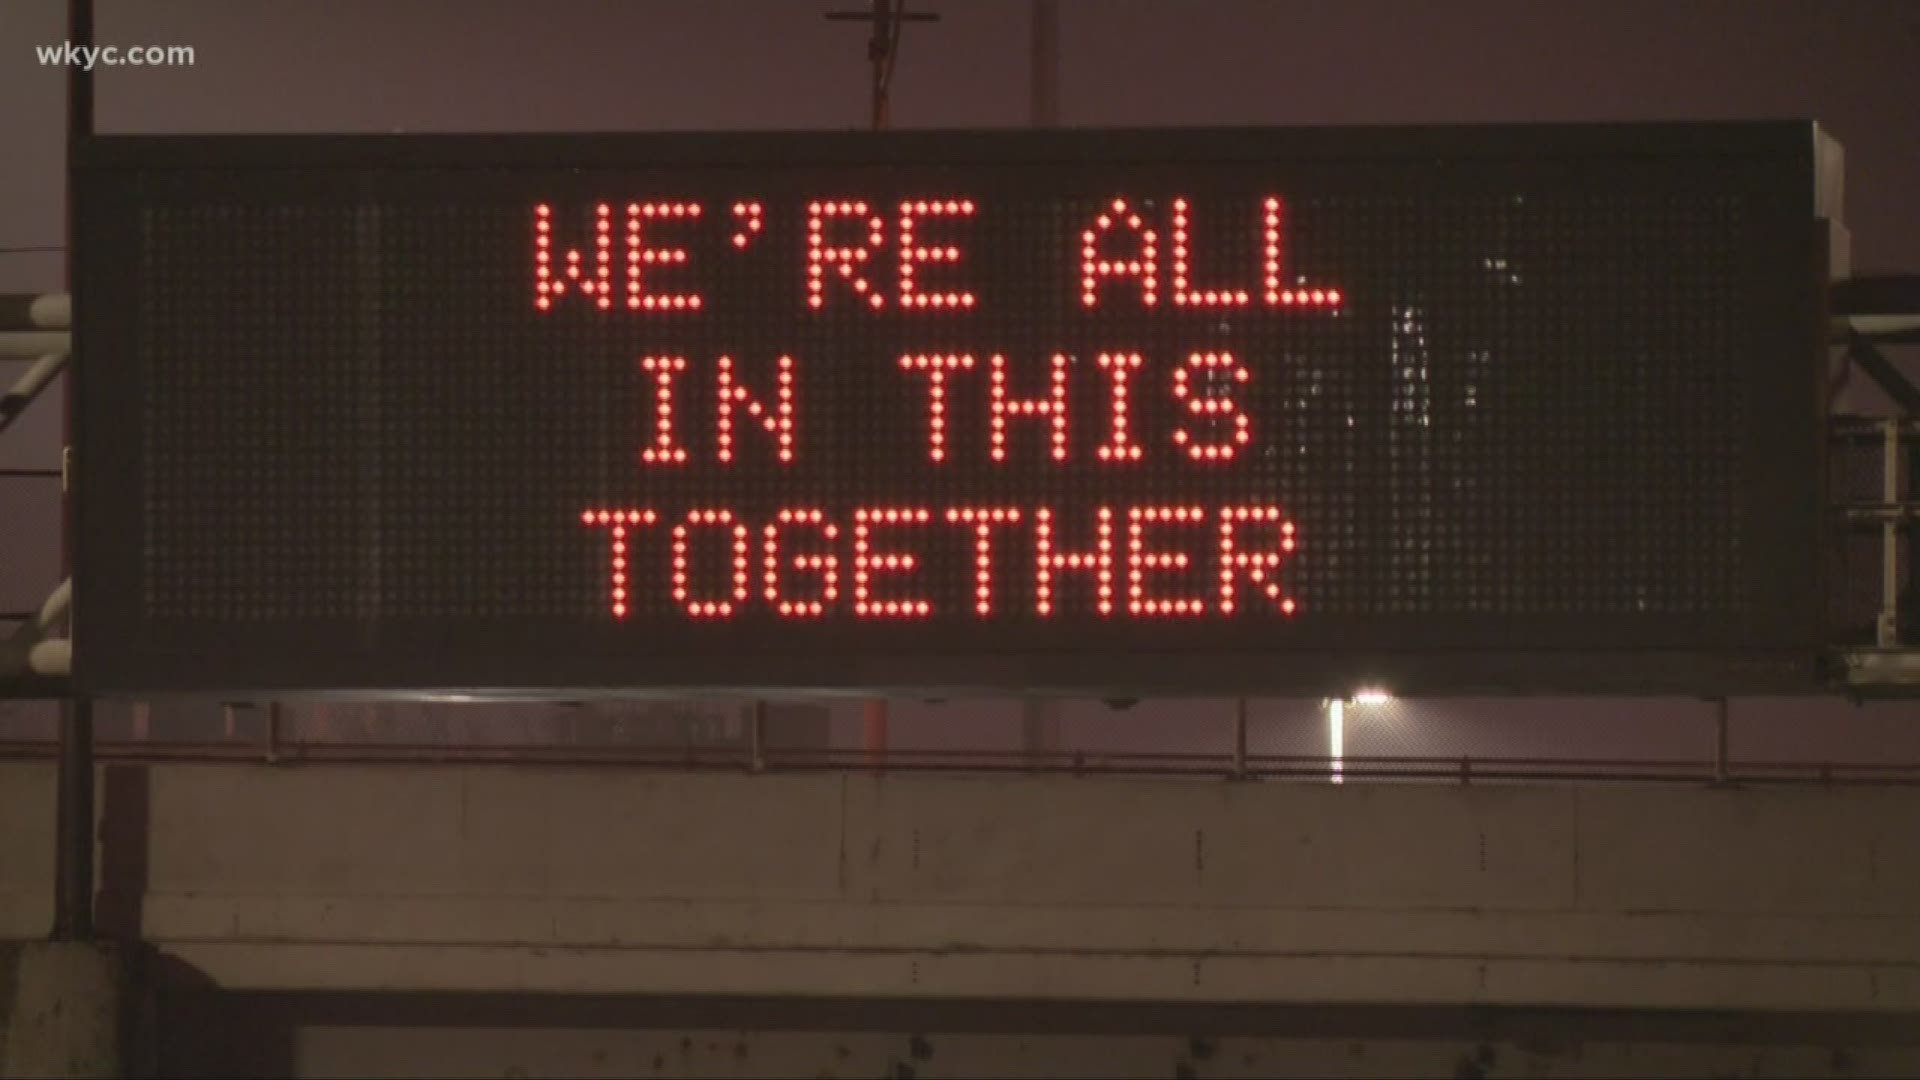 'We're all in this together.' Drivers along Ohio's highways will notice new messages on ODOT road signs as the state deals with combating the spread of coronavirus.